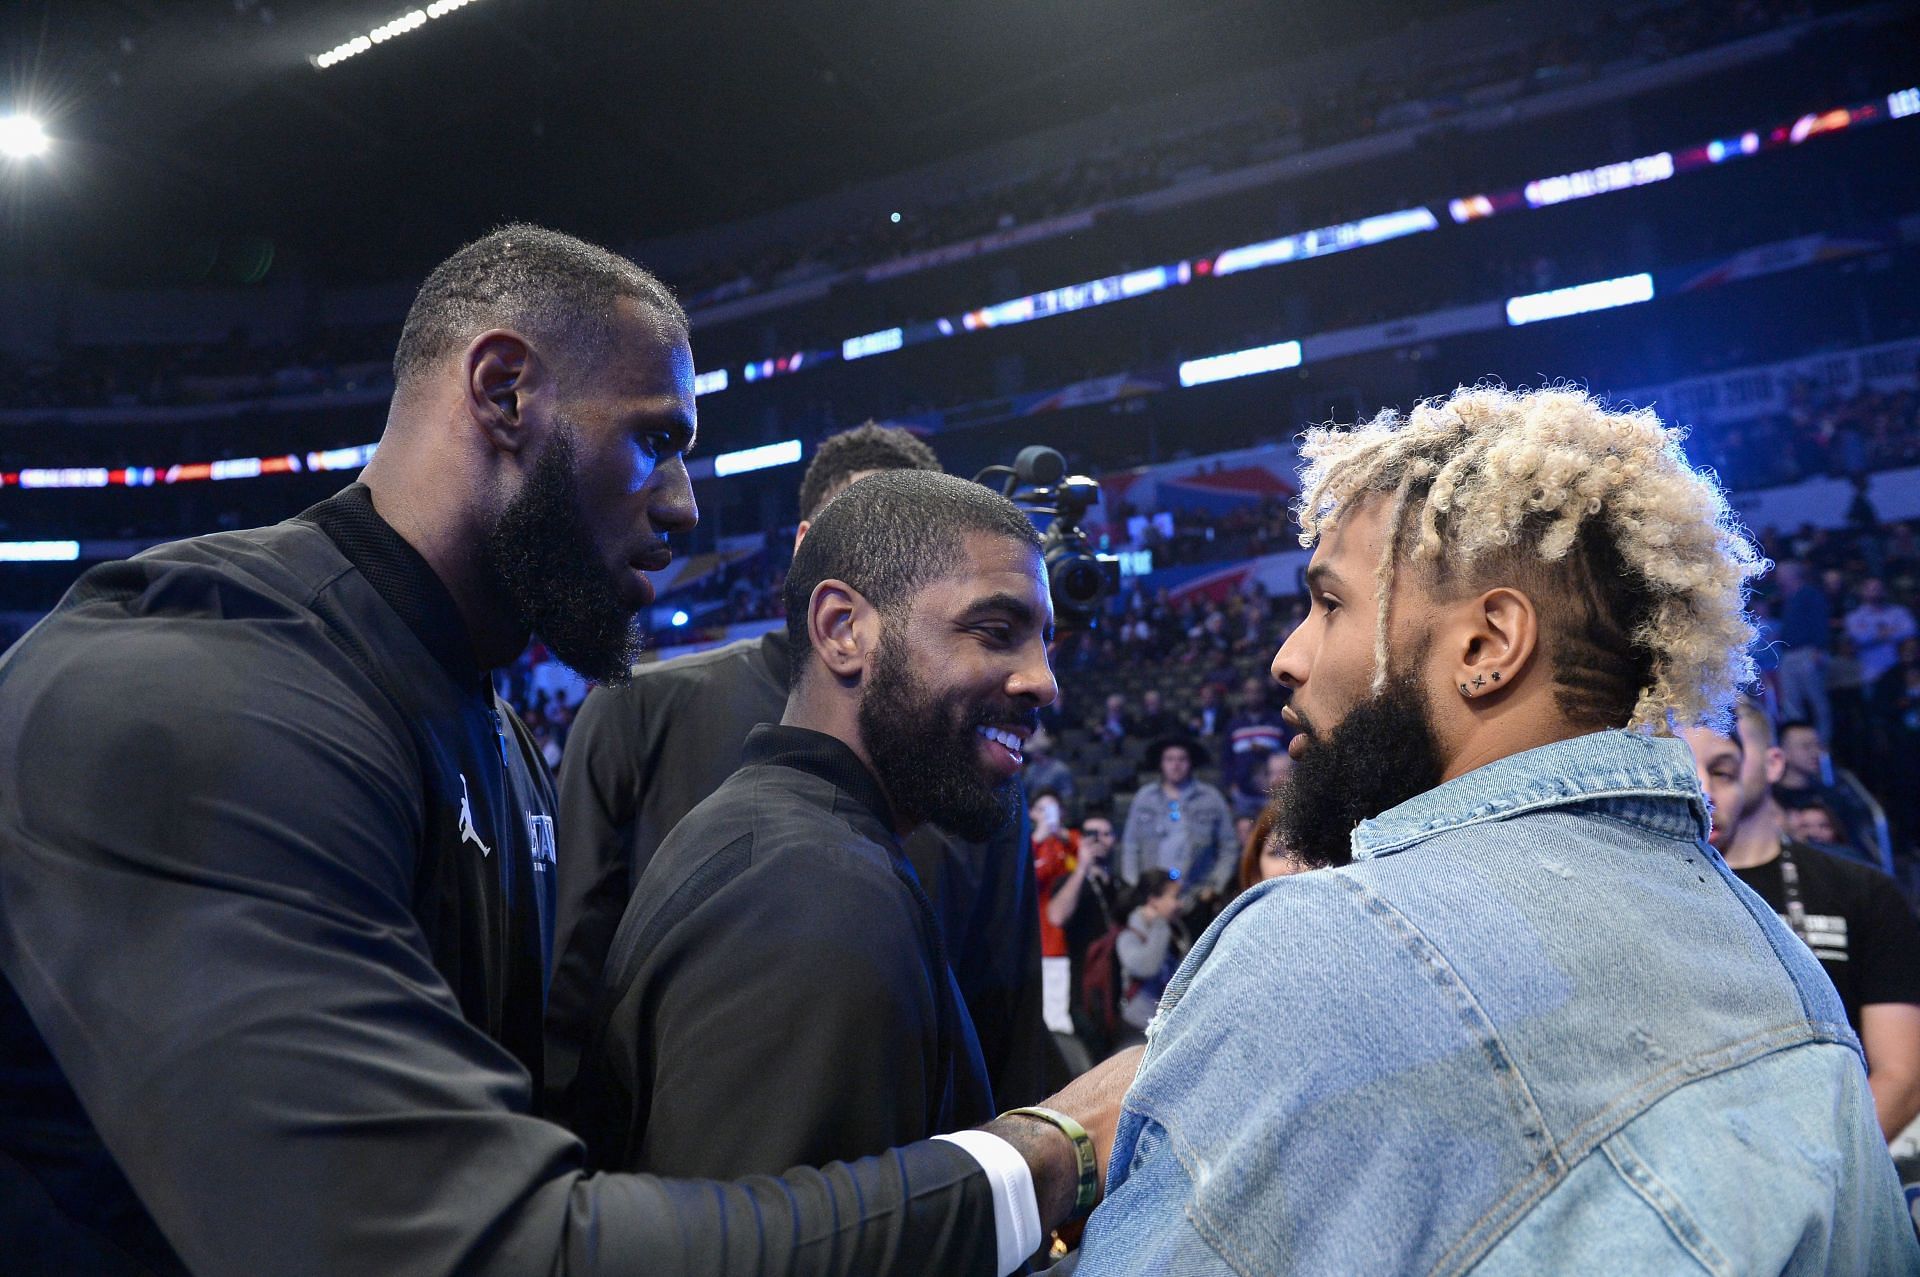 LeBron James on the right and Odell Beckham Jr. on the left at the 2018 NBA All-Star Game